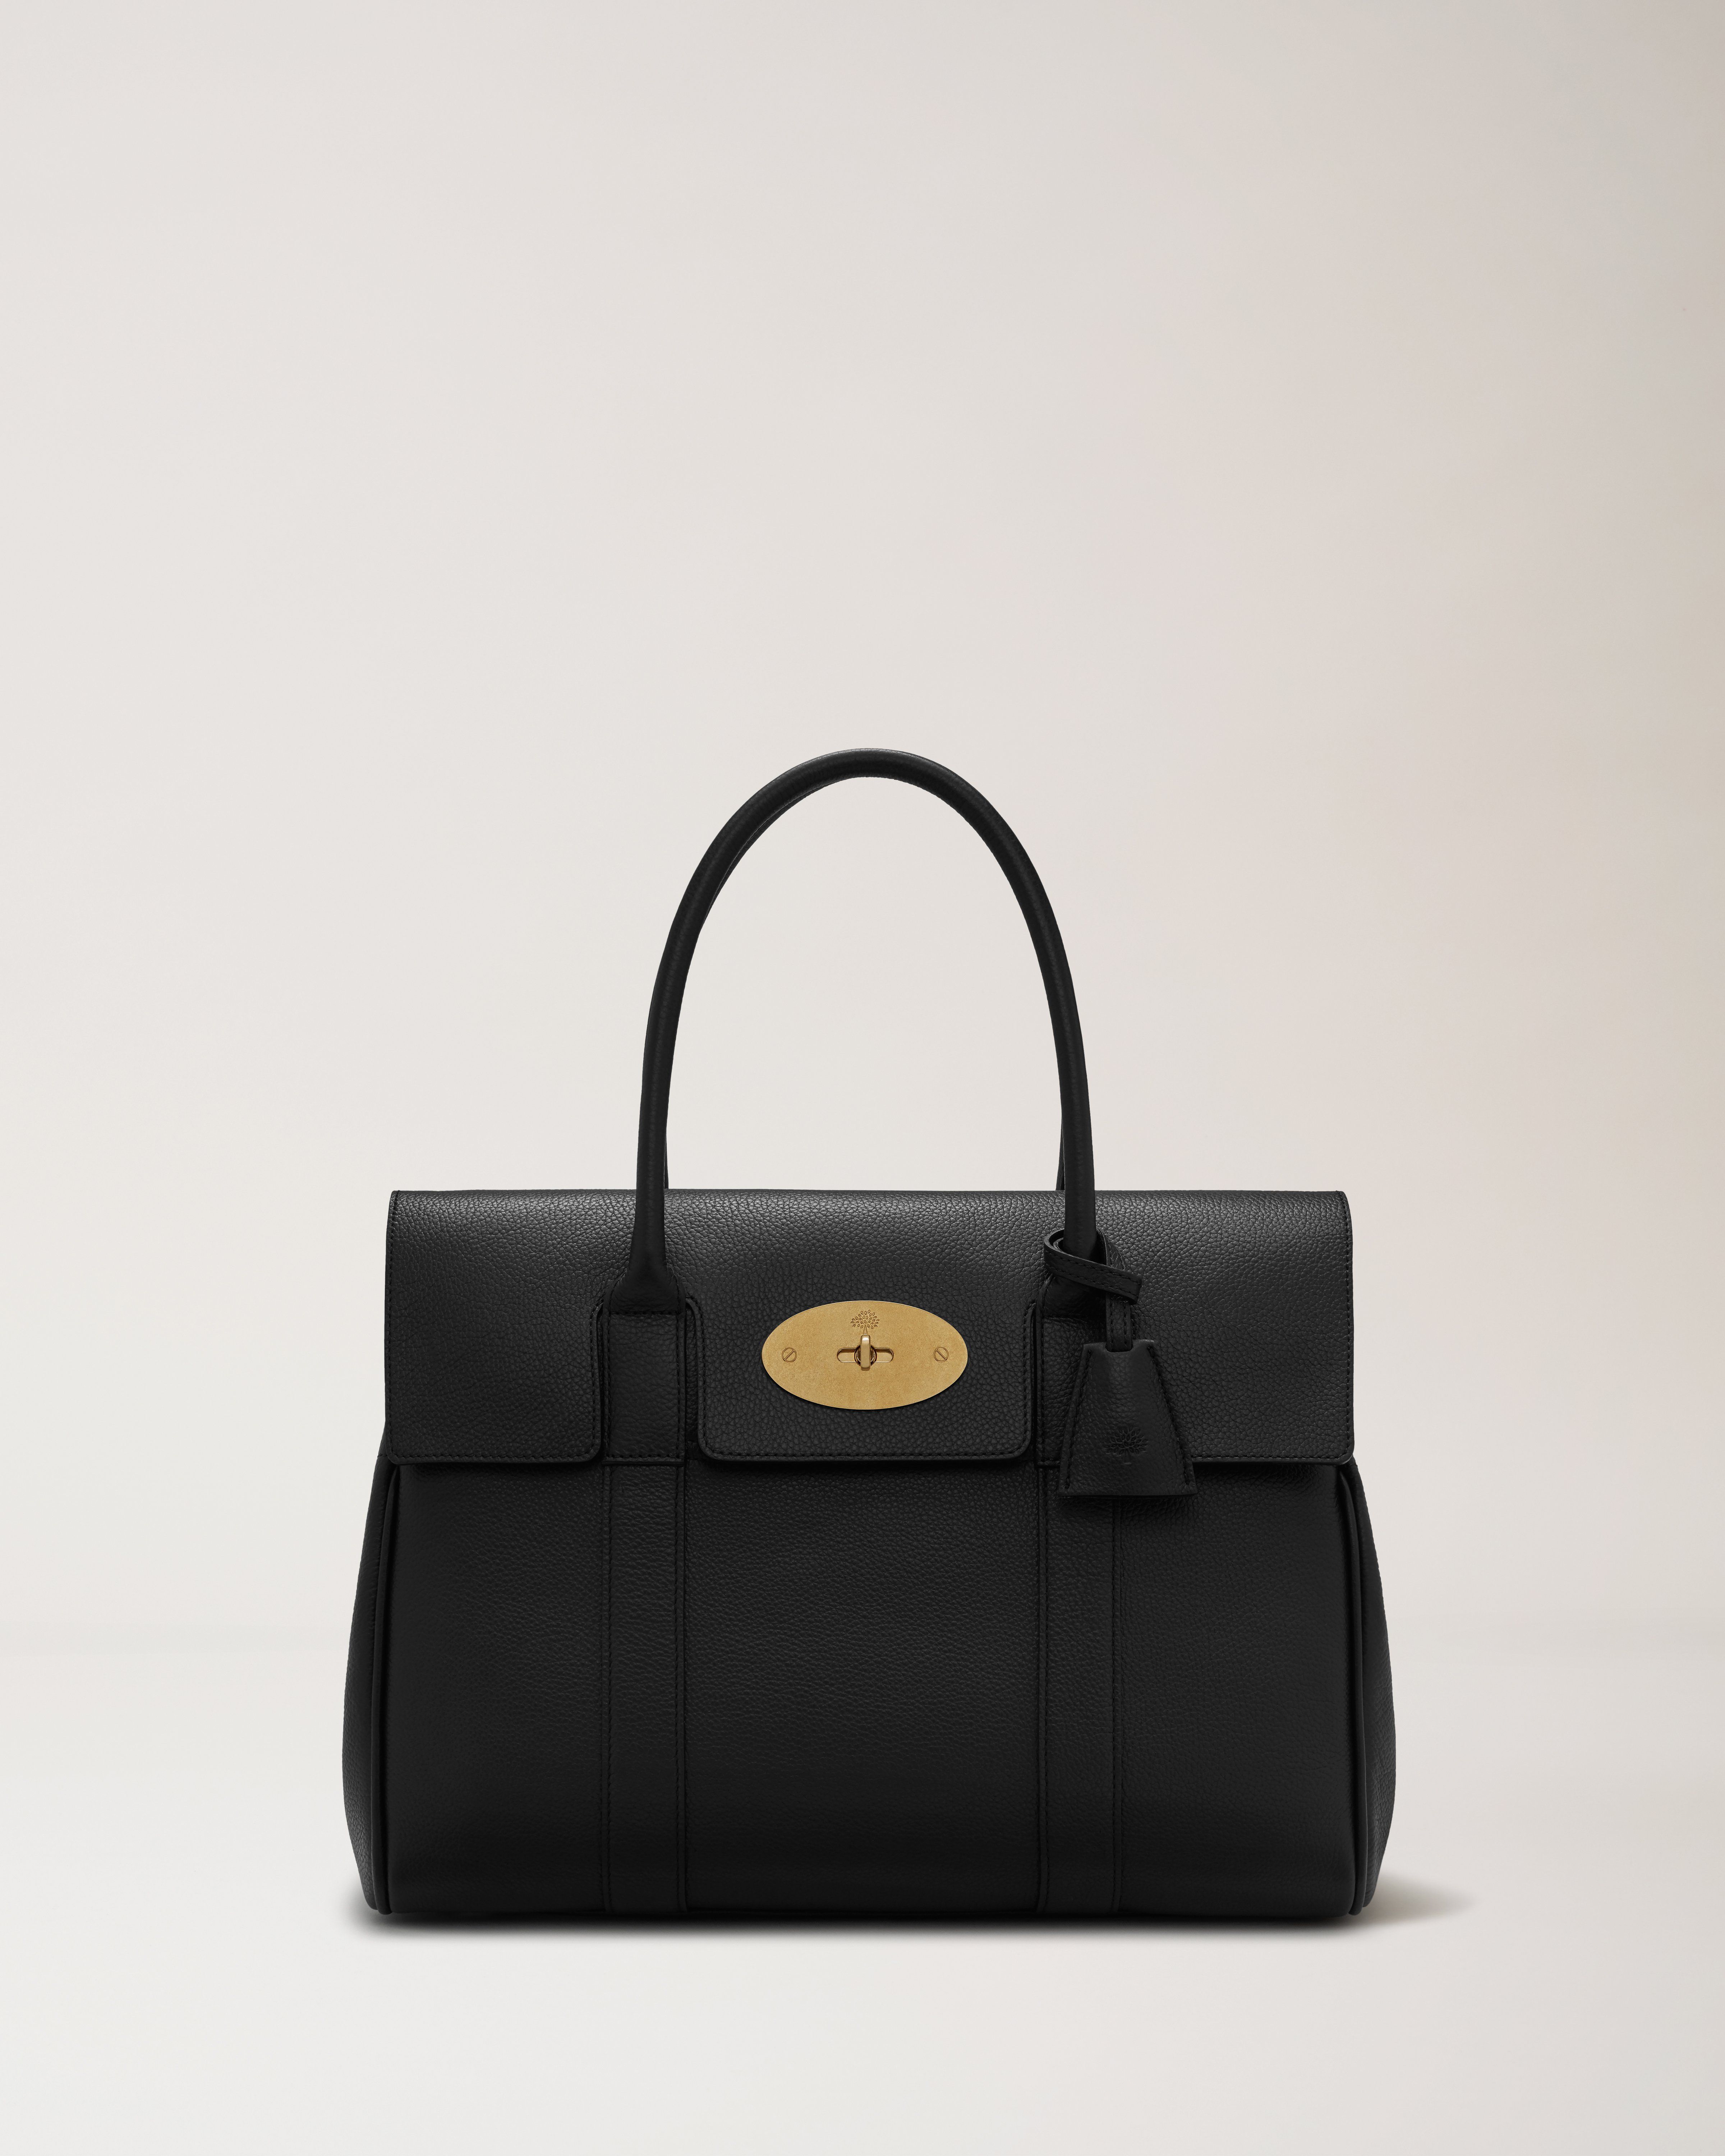 Mulberry Bayswater in Black gold